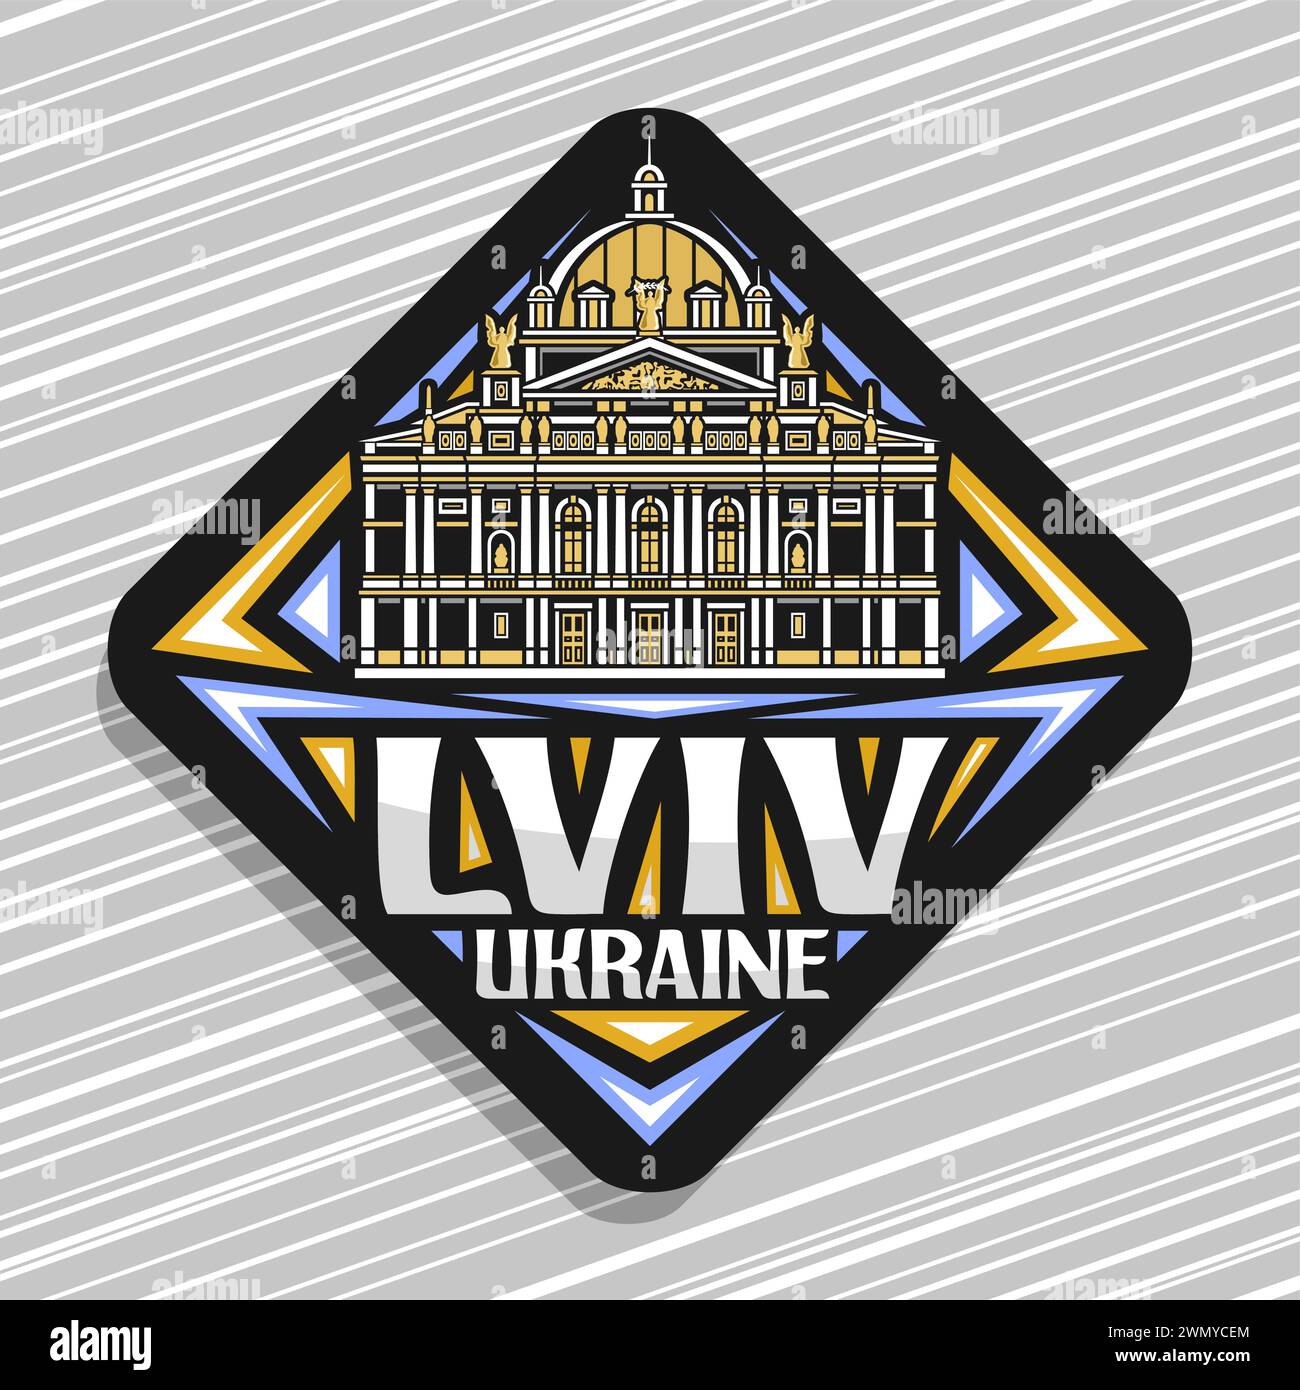 Vector logo for Lviv, dark rhombus road sign with line illustration of famous lviv theatre of opera and ballet, decorative refrigerator magnet with un Stock Vector